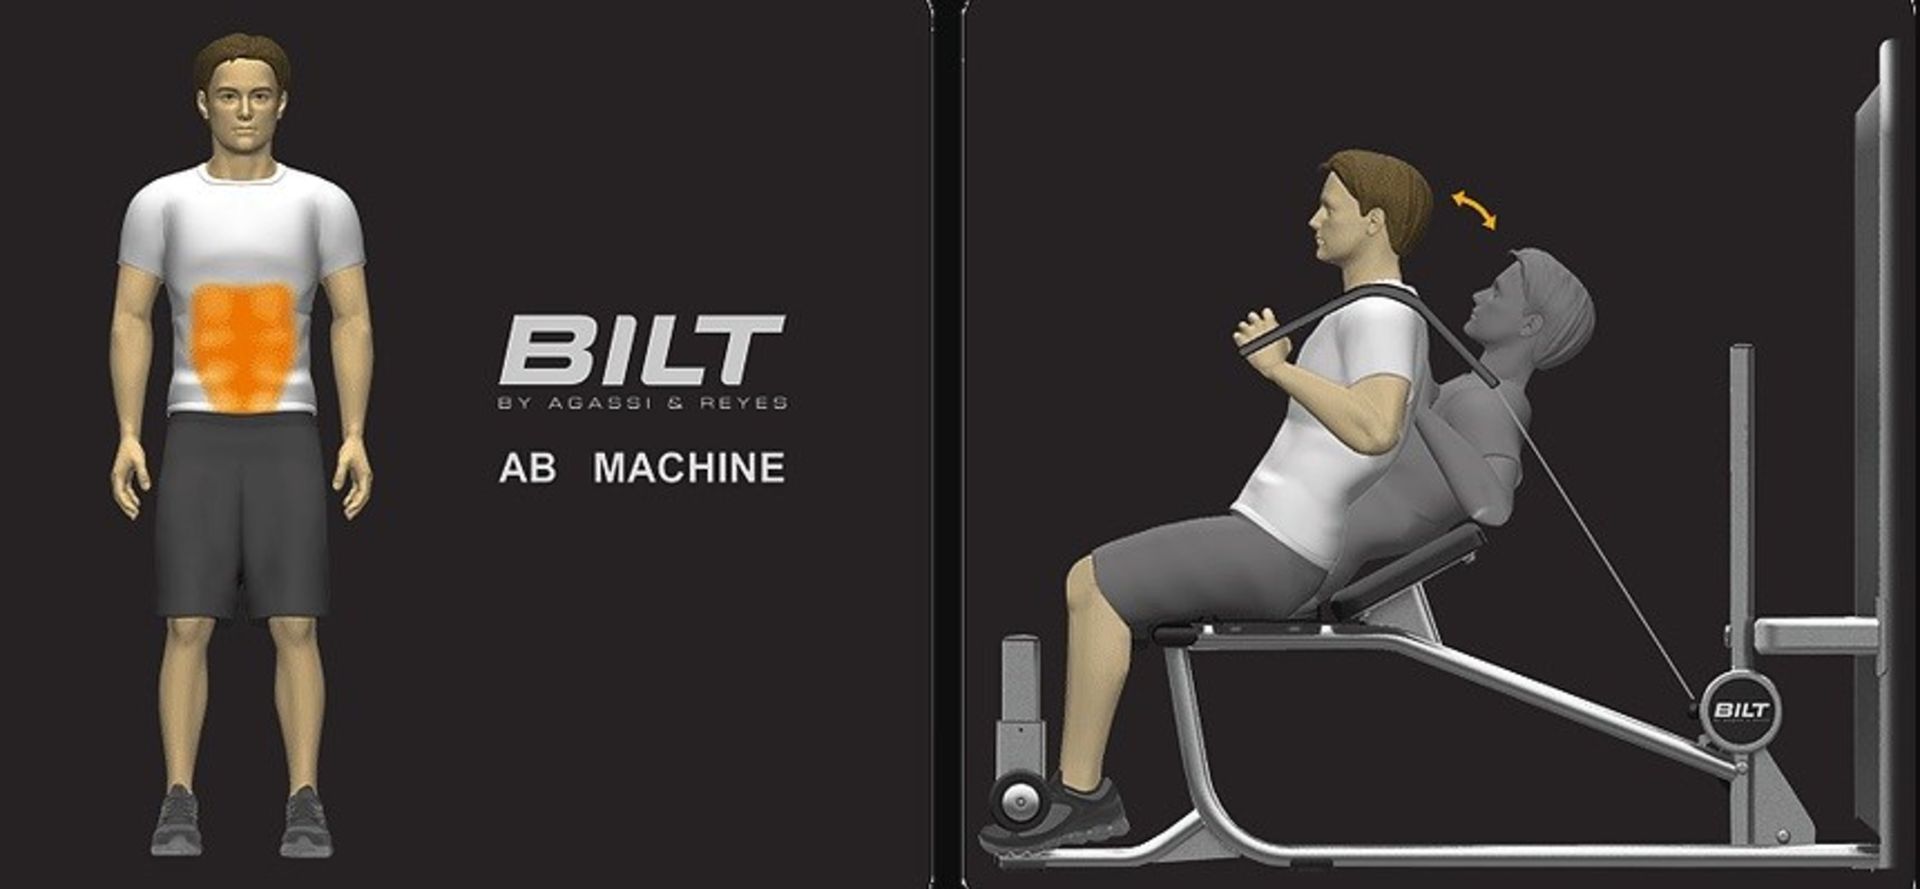 1 x BILT Abdominal Commercial Gym Machine By Agassi & Reyes - BCAB01 - CL500 - New / Boxed Stock - - Image 4 of 6